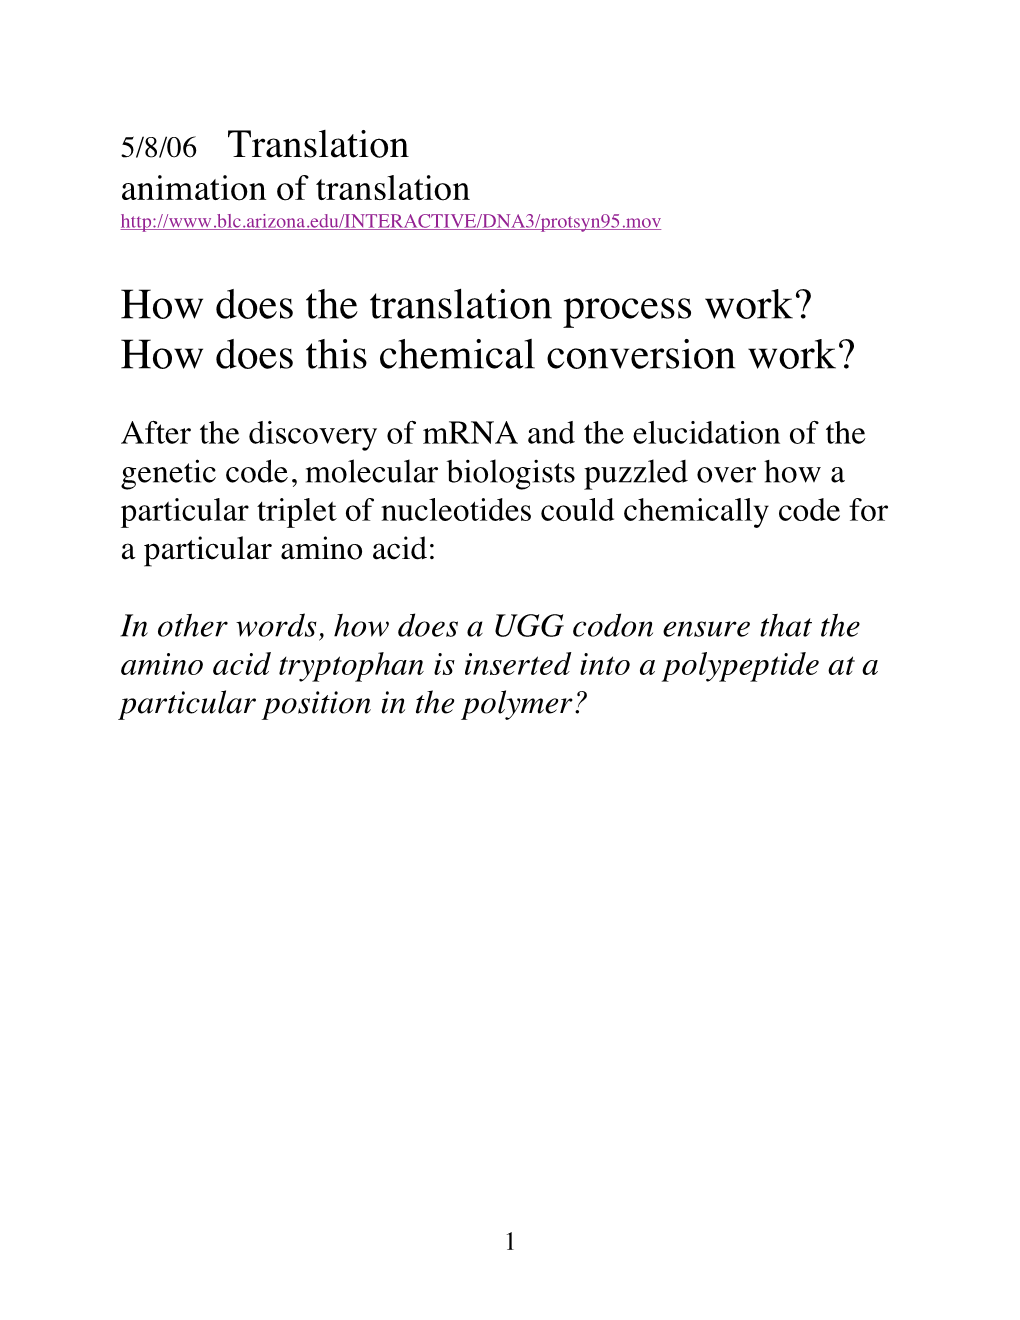 How Does the Translation Process Work? How Does This Chemical Conversion Work?